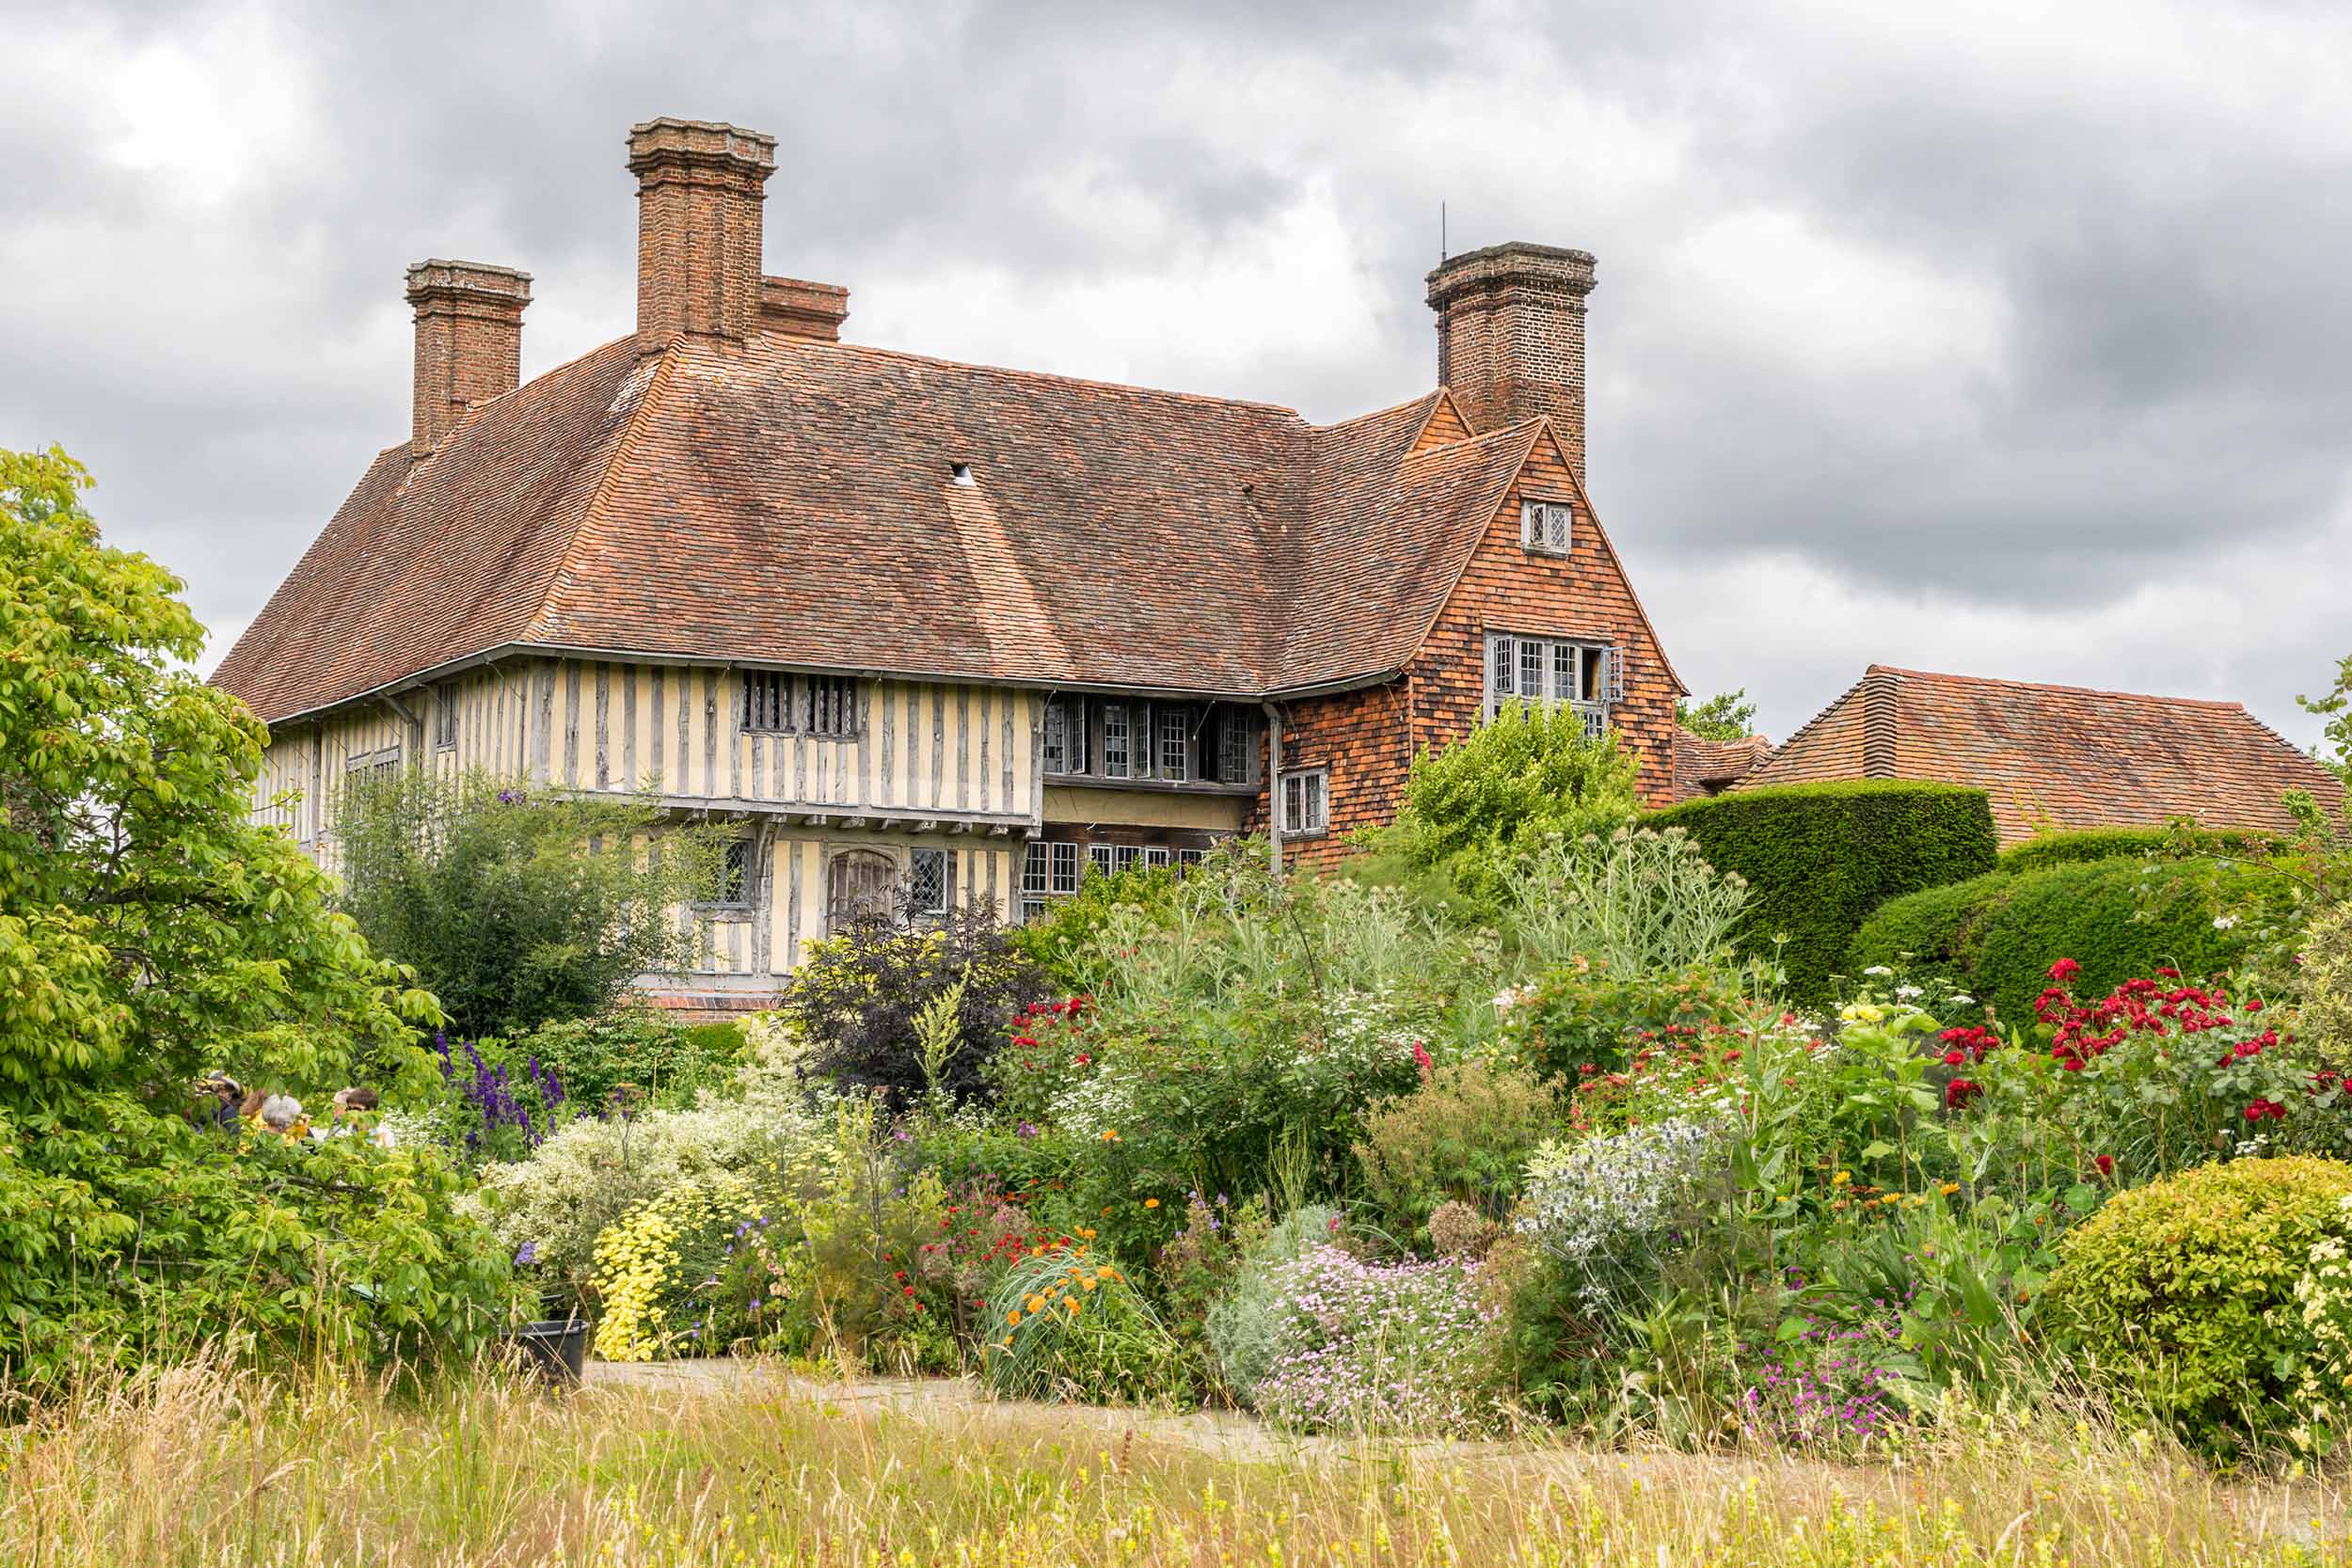 Great Dixter house and gardens